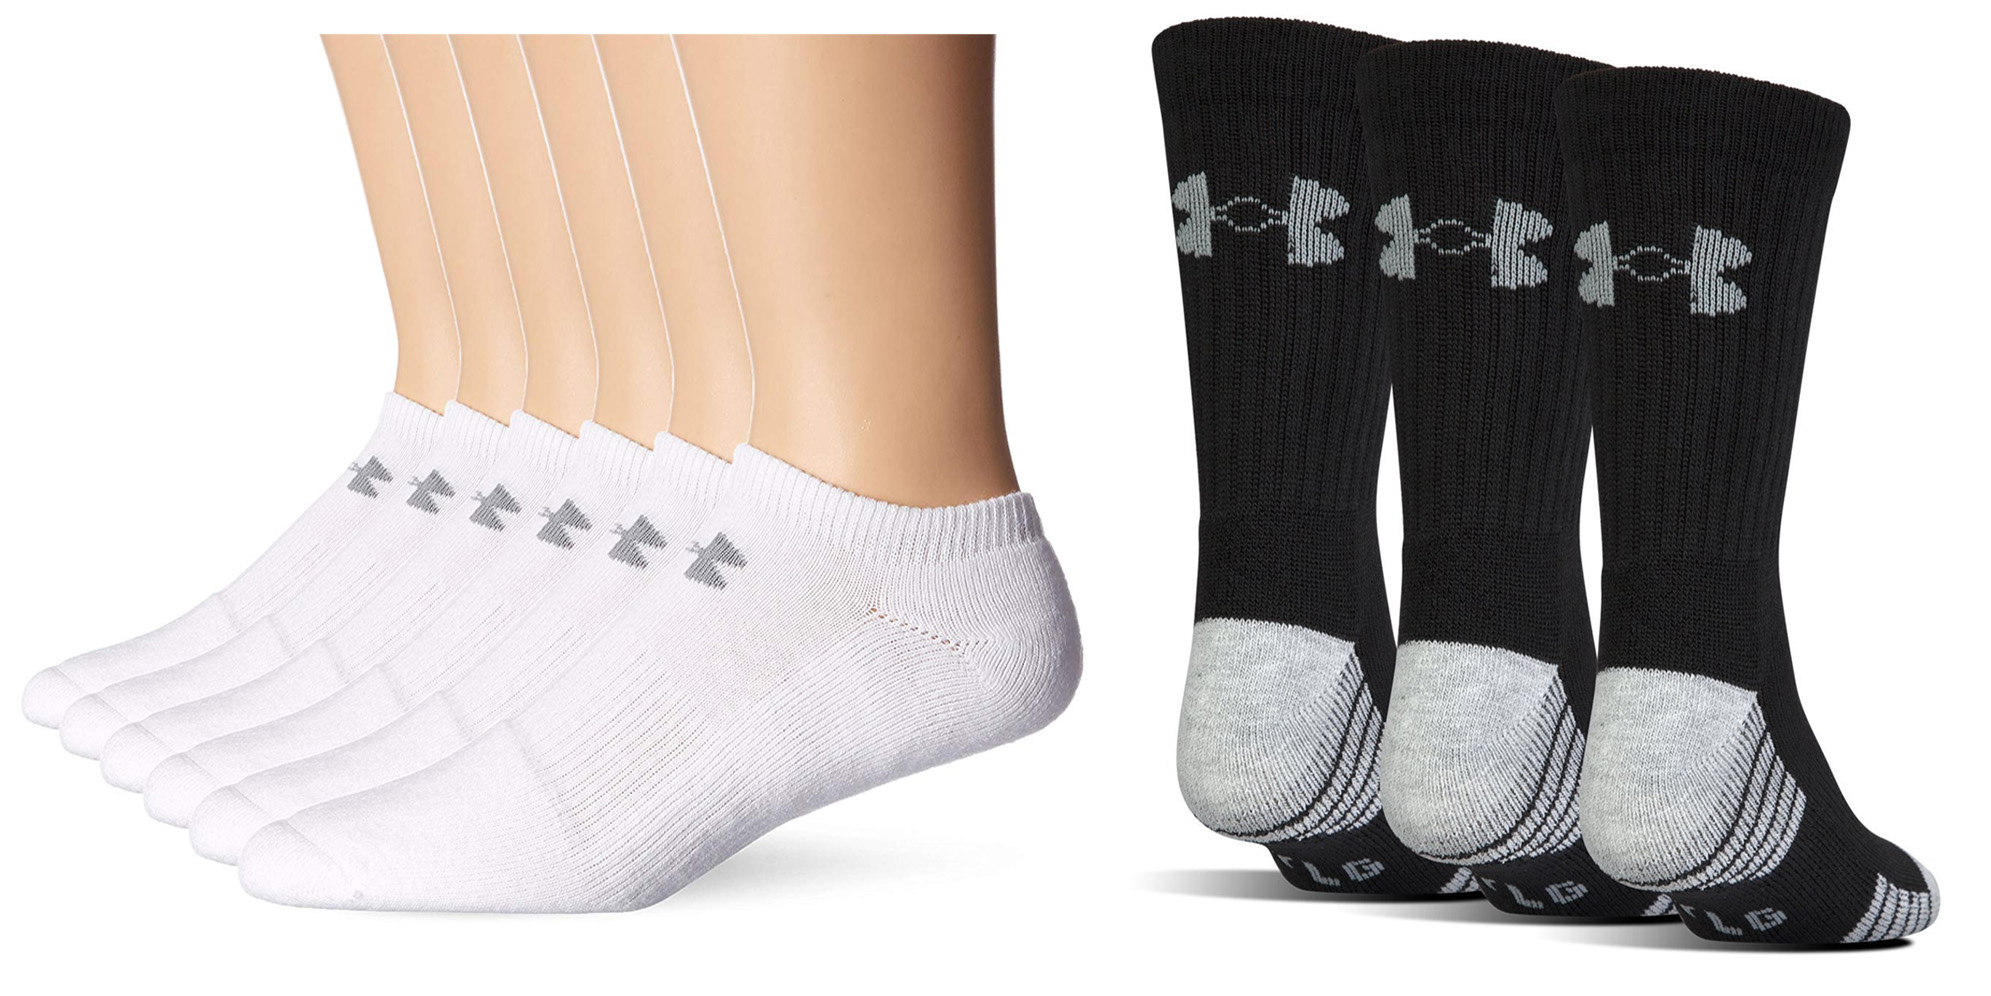 Score Under Armour socks from as low as 